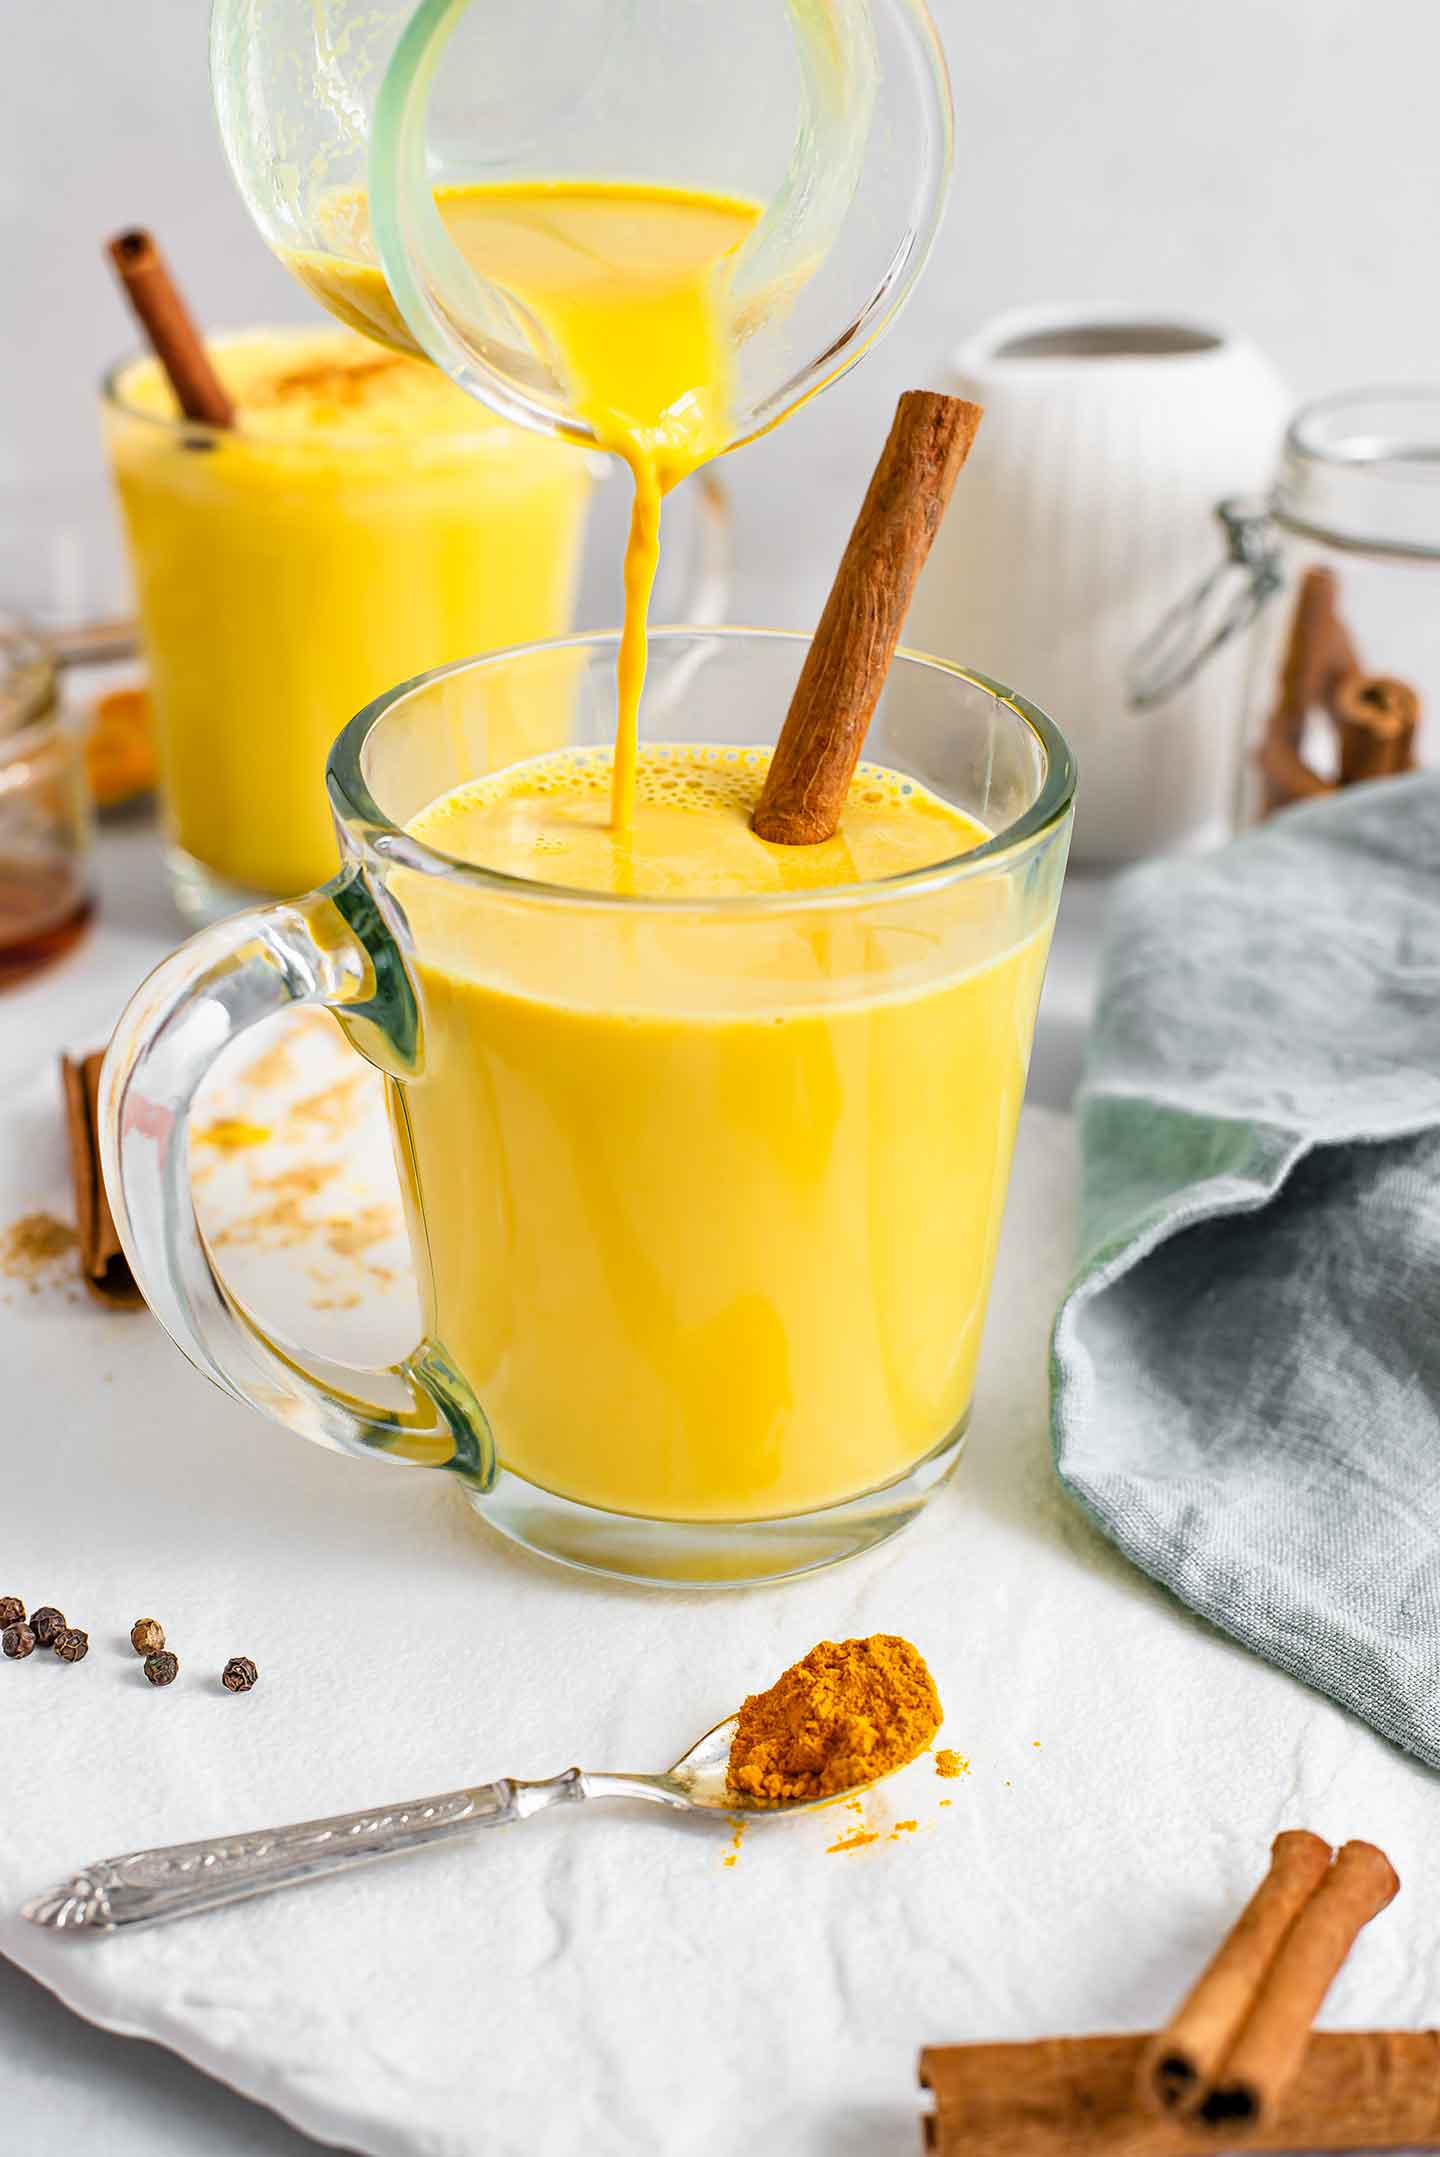 Tasty Turmeric Golden Milk To Keep You Powerful • Tasty Thrifty Timely